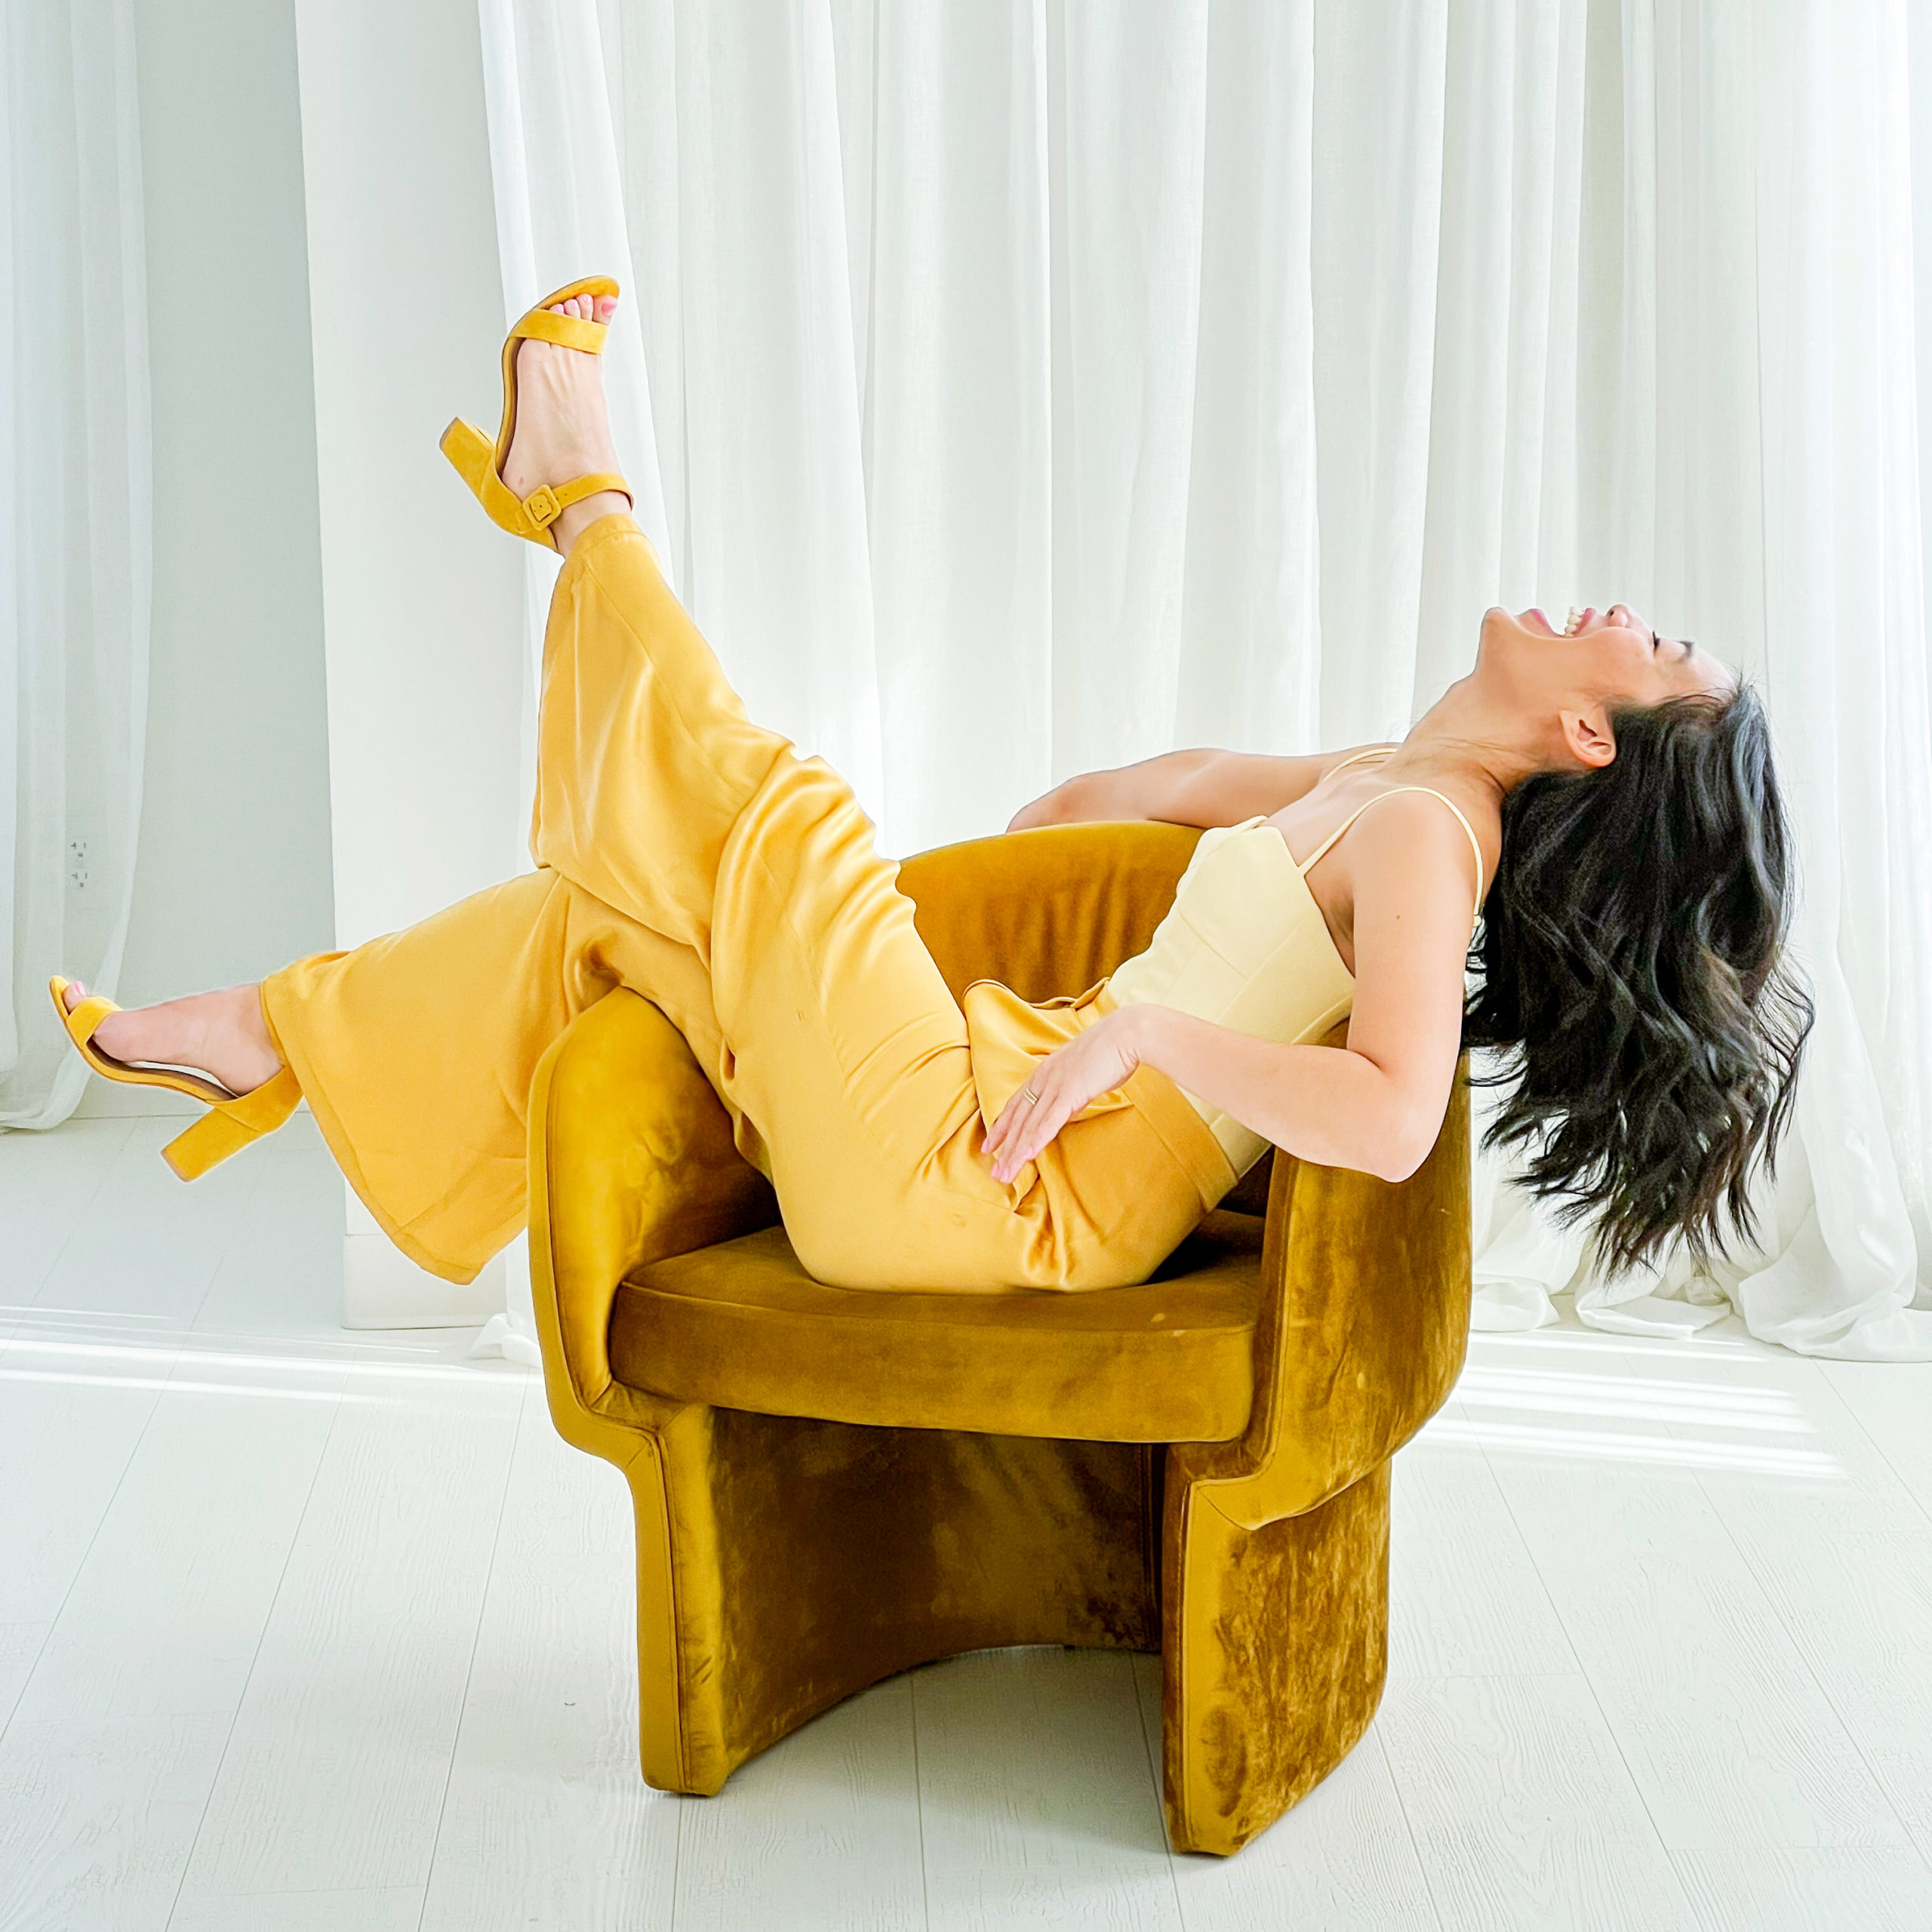 Image of Nicole Yang in a yellow bodice and yellow satin pants kicking her legs up in a yellow velvet chair